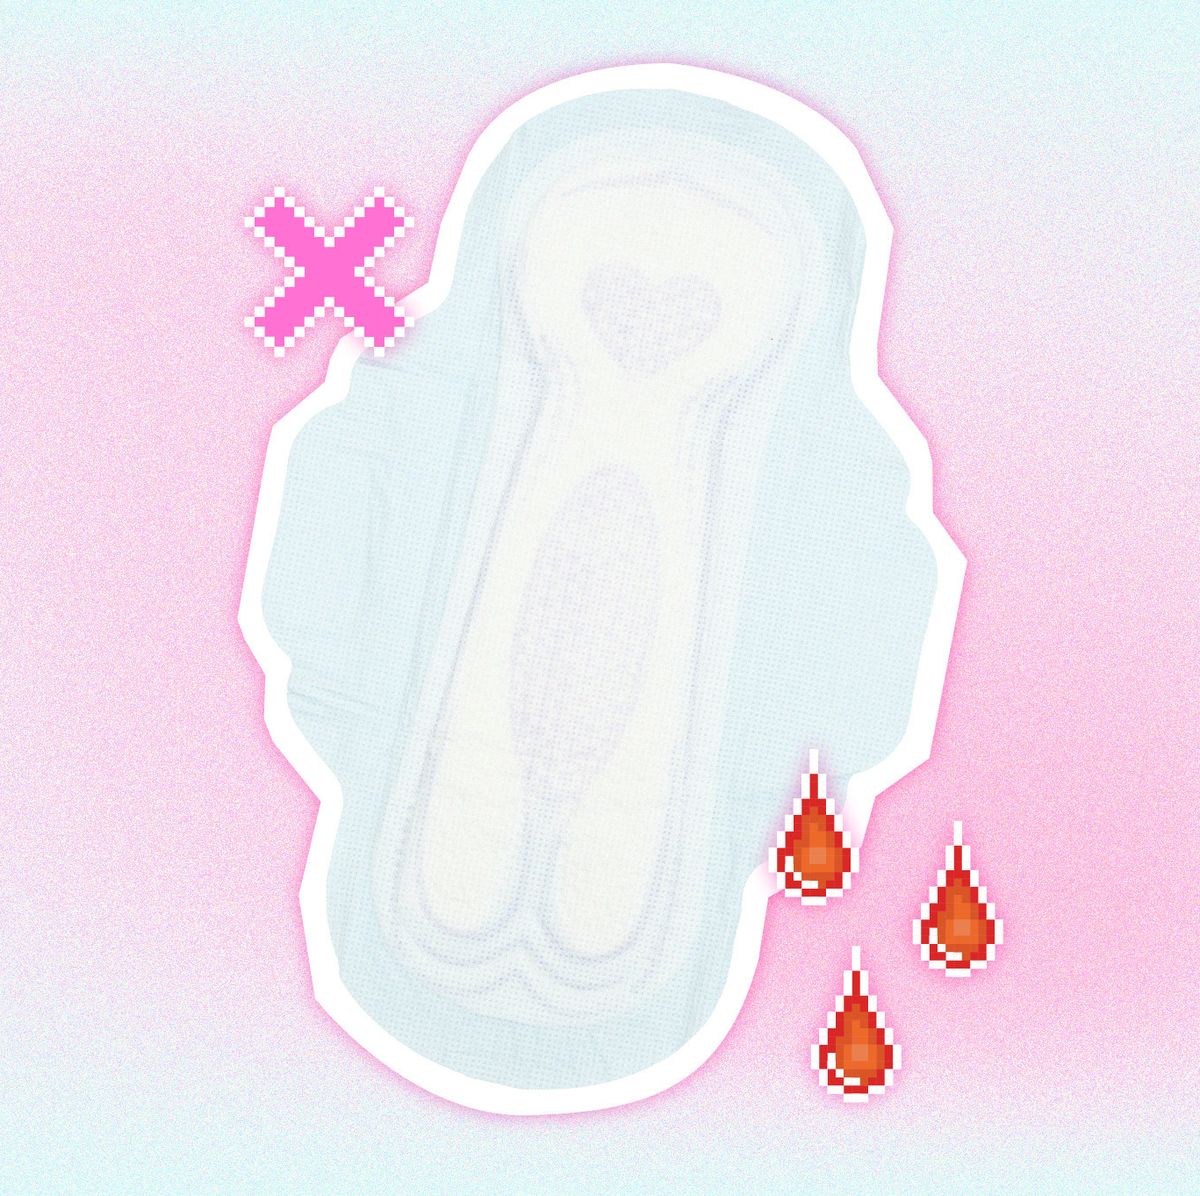 💧🔥🩸 on X: a little pink at the beginning is okay, but your period  should ideally be flowing red w few or no clots. all of the rest is either  a sign